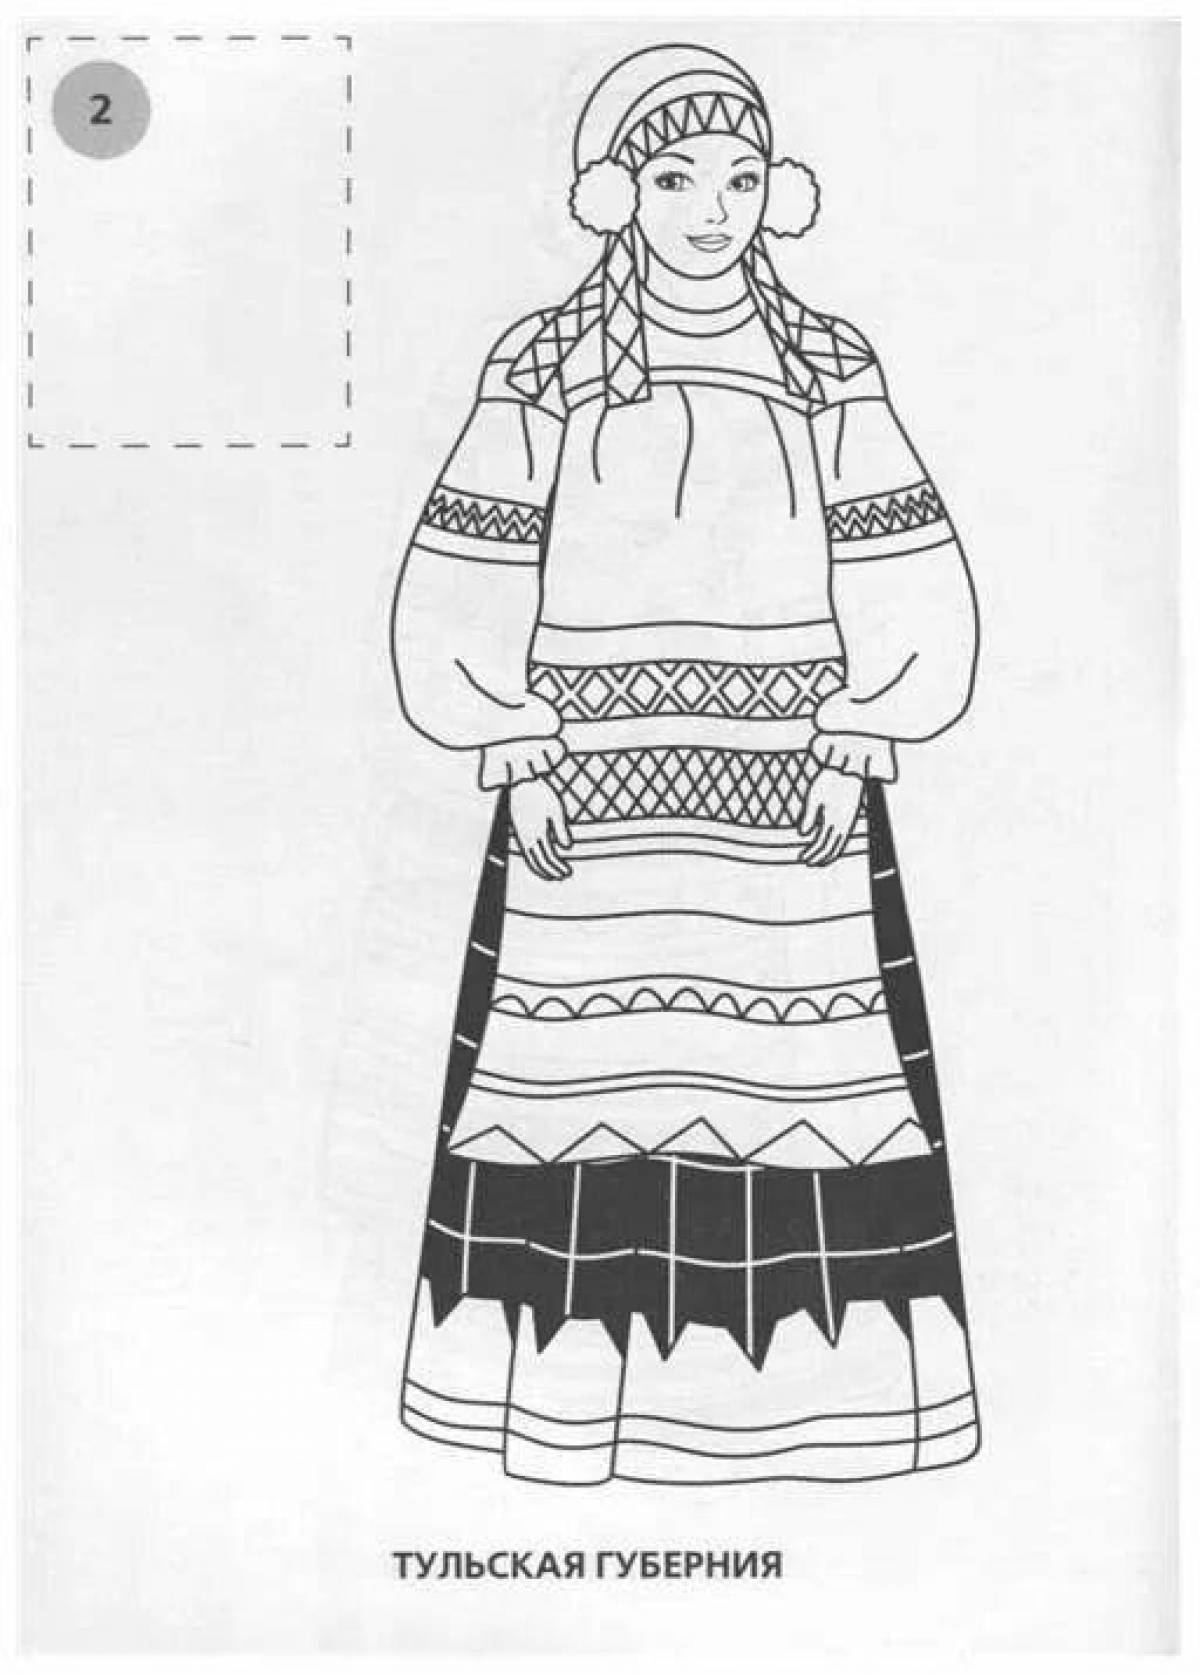 A fascinating coloring of the Russian folk costume for children